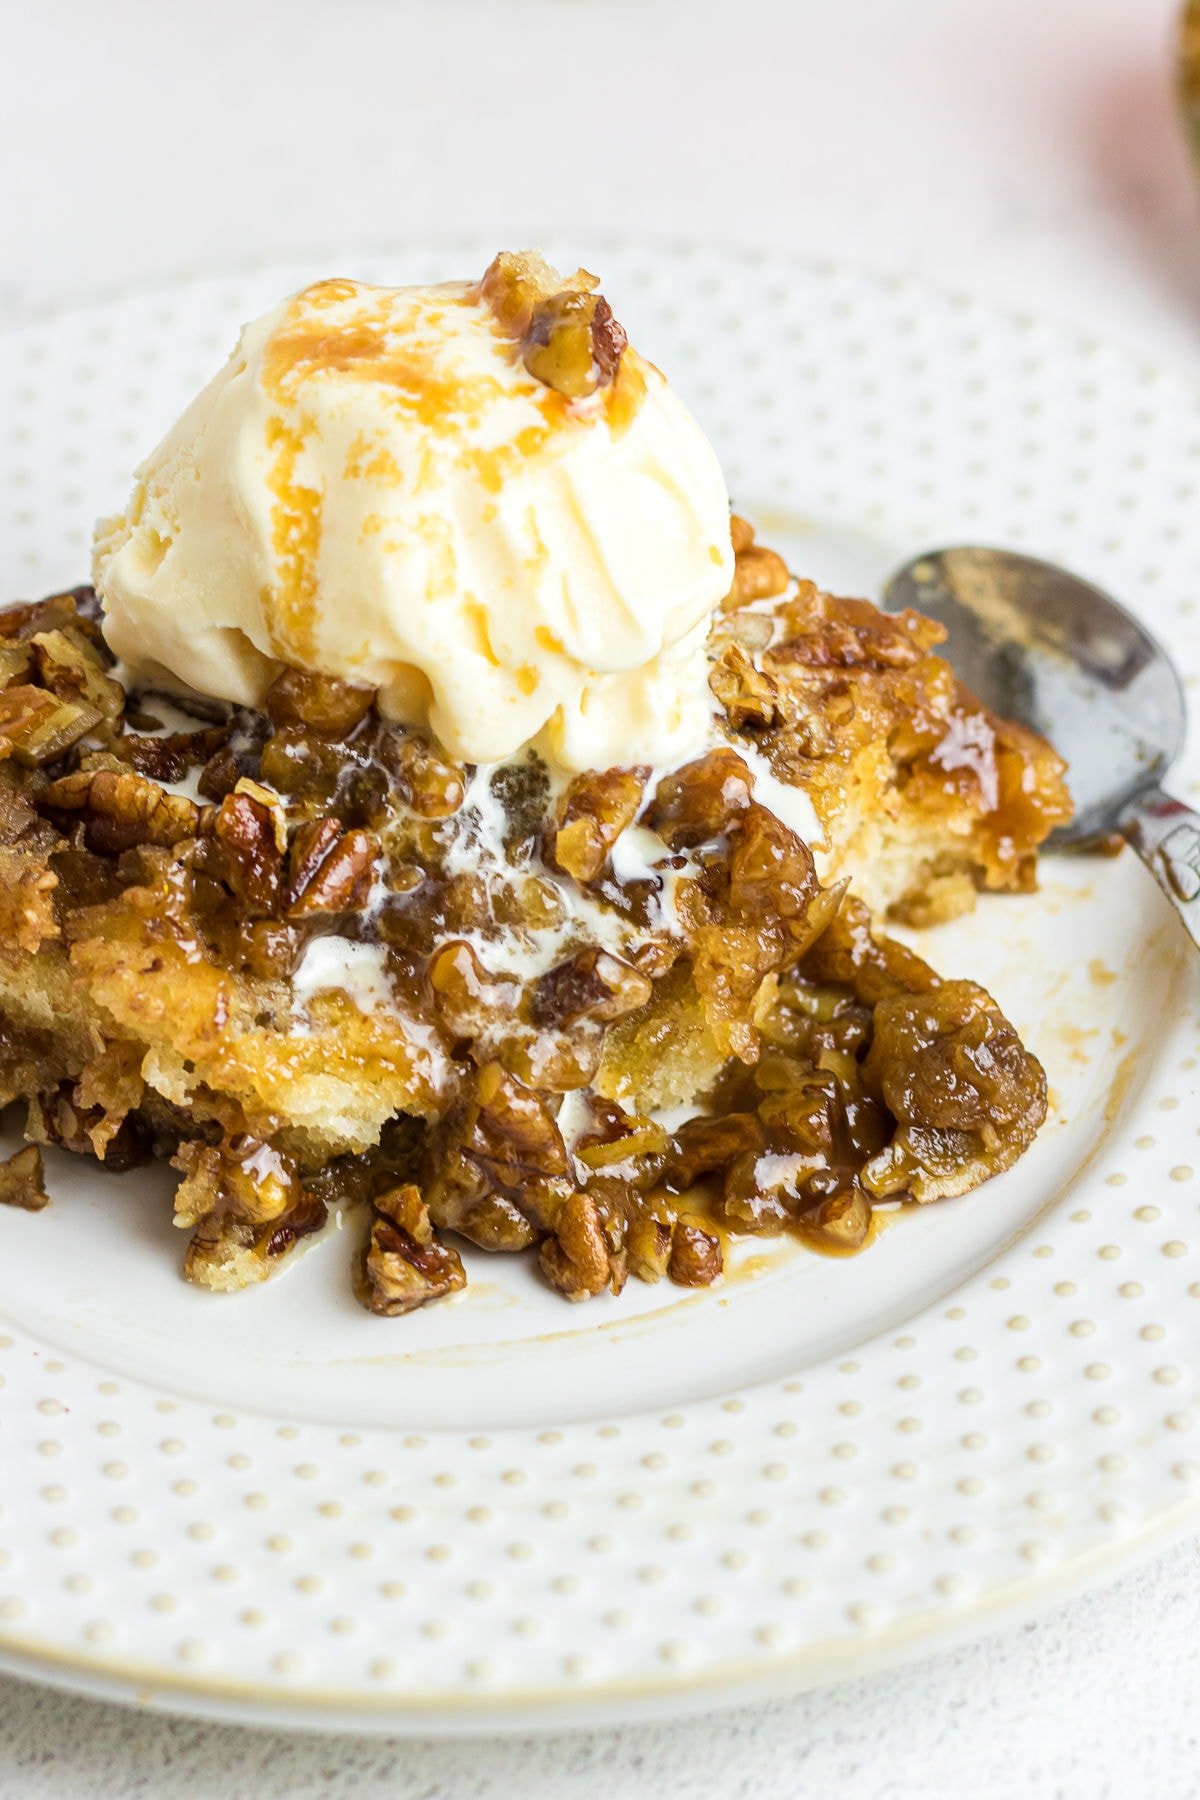 A close-up photo highlights a scoop of gooey pecan cobbler on a white plate with some ice cream on top and a spoon in the background.